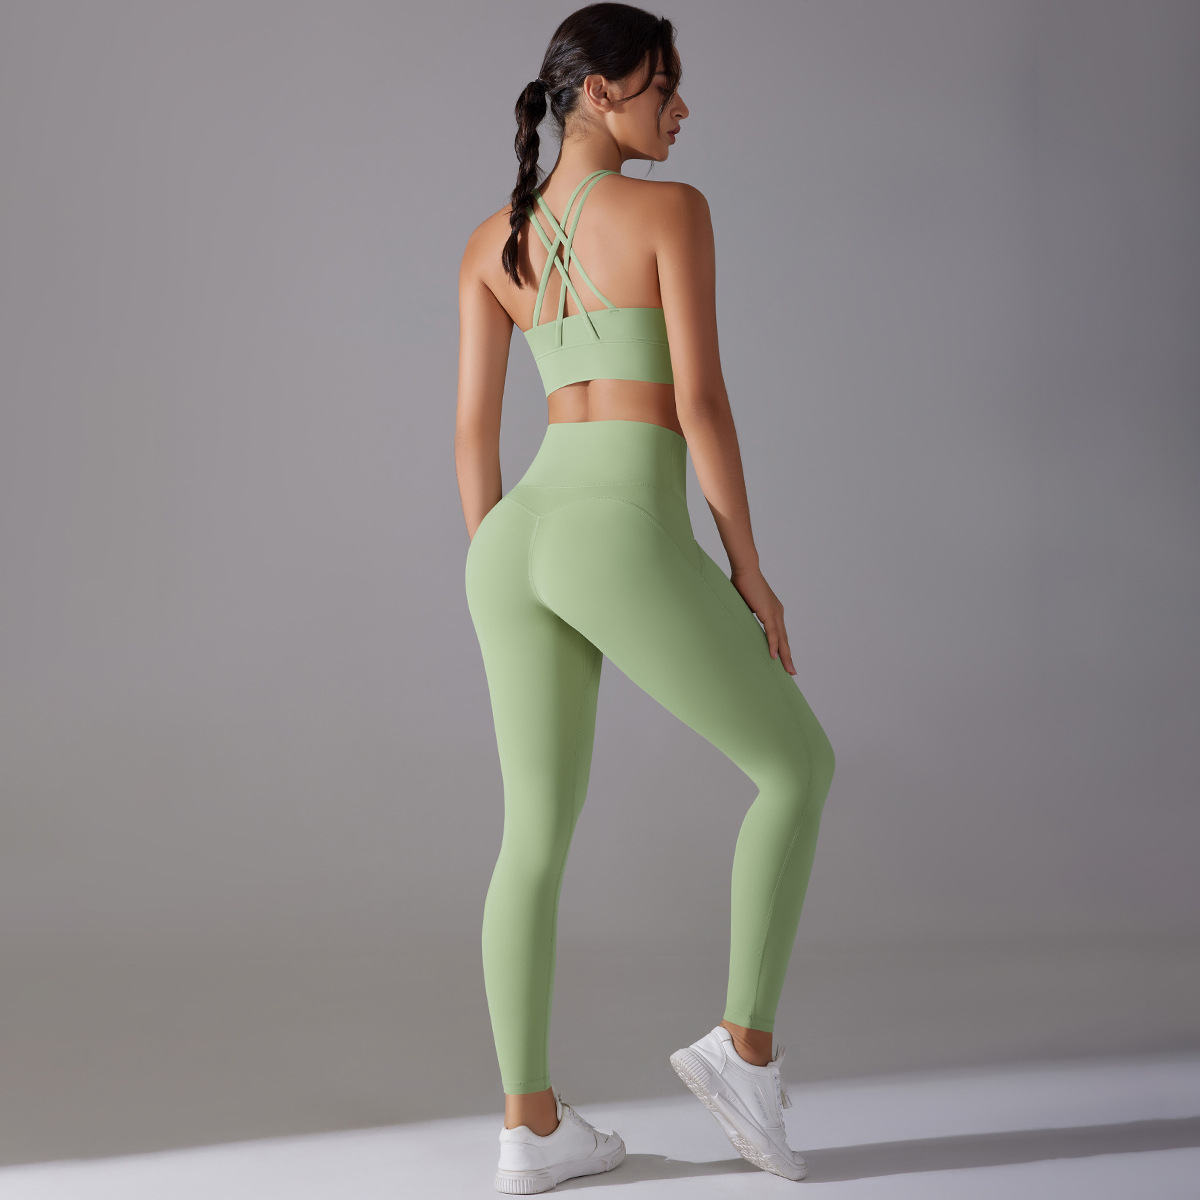 private label activewear manufacturers